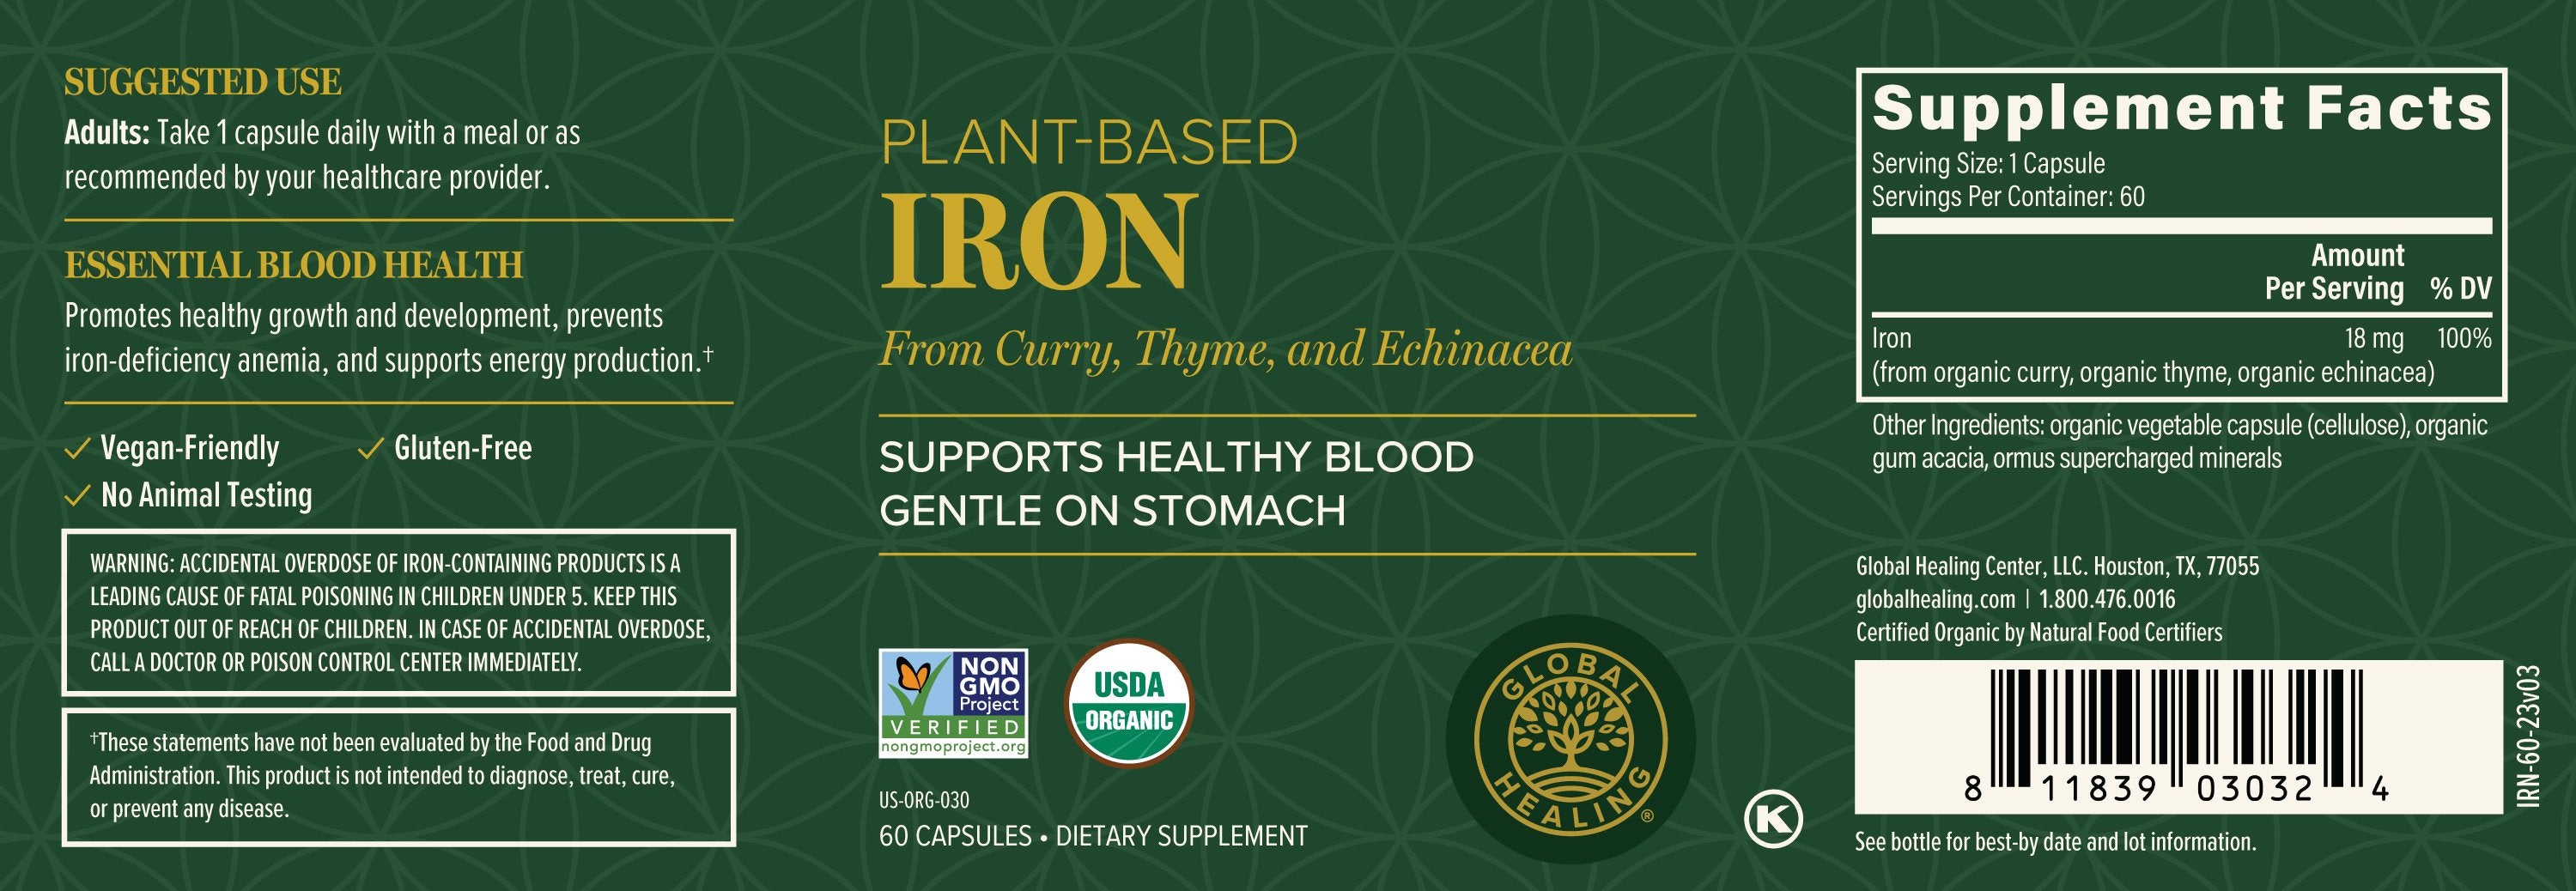 Global Healing Plant Based Iron From Curry Thyme and Echinacea Bottle Label 60 Capsules